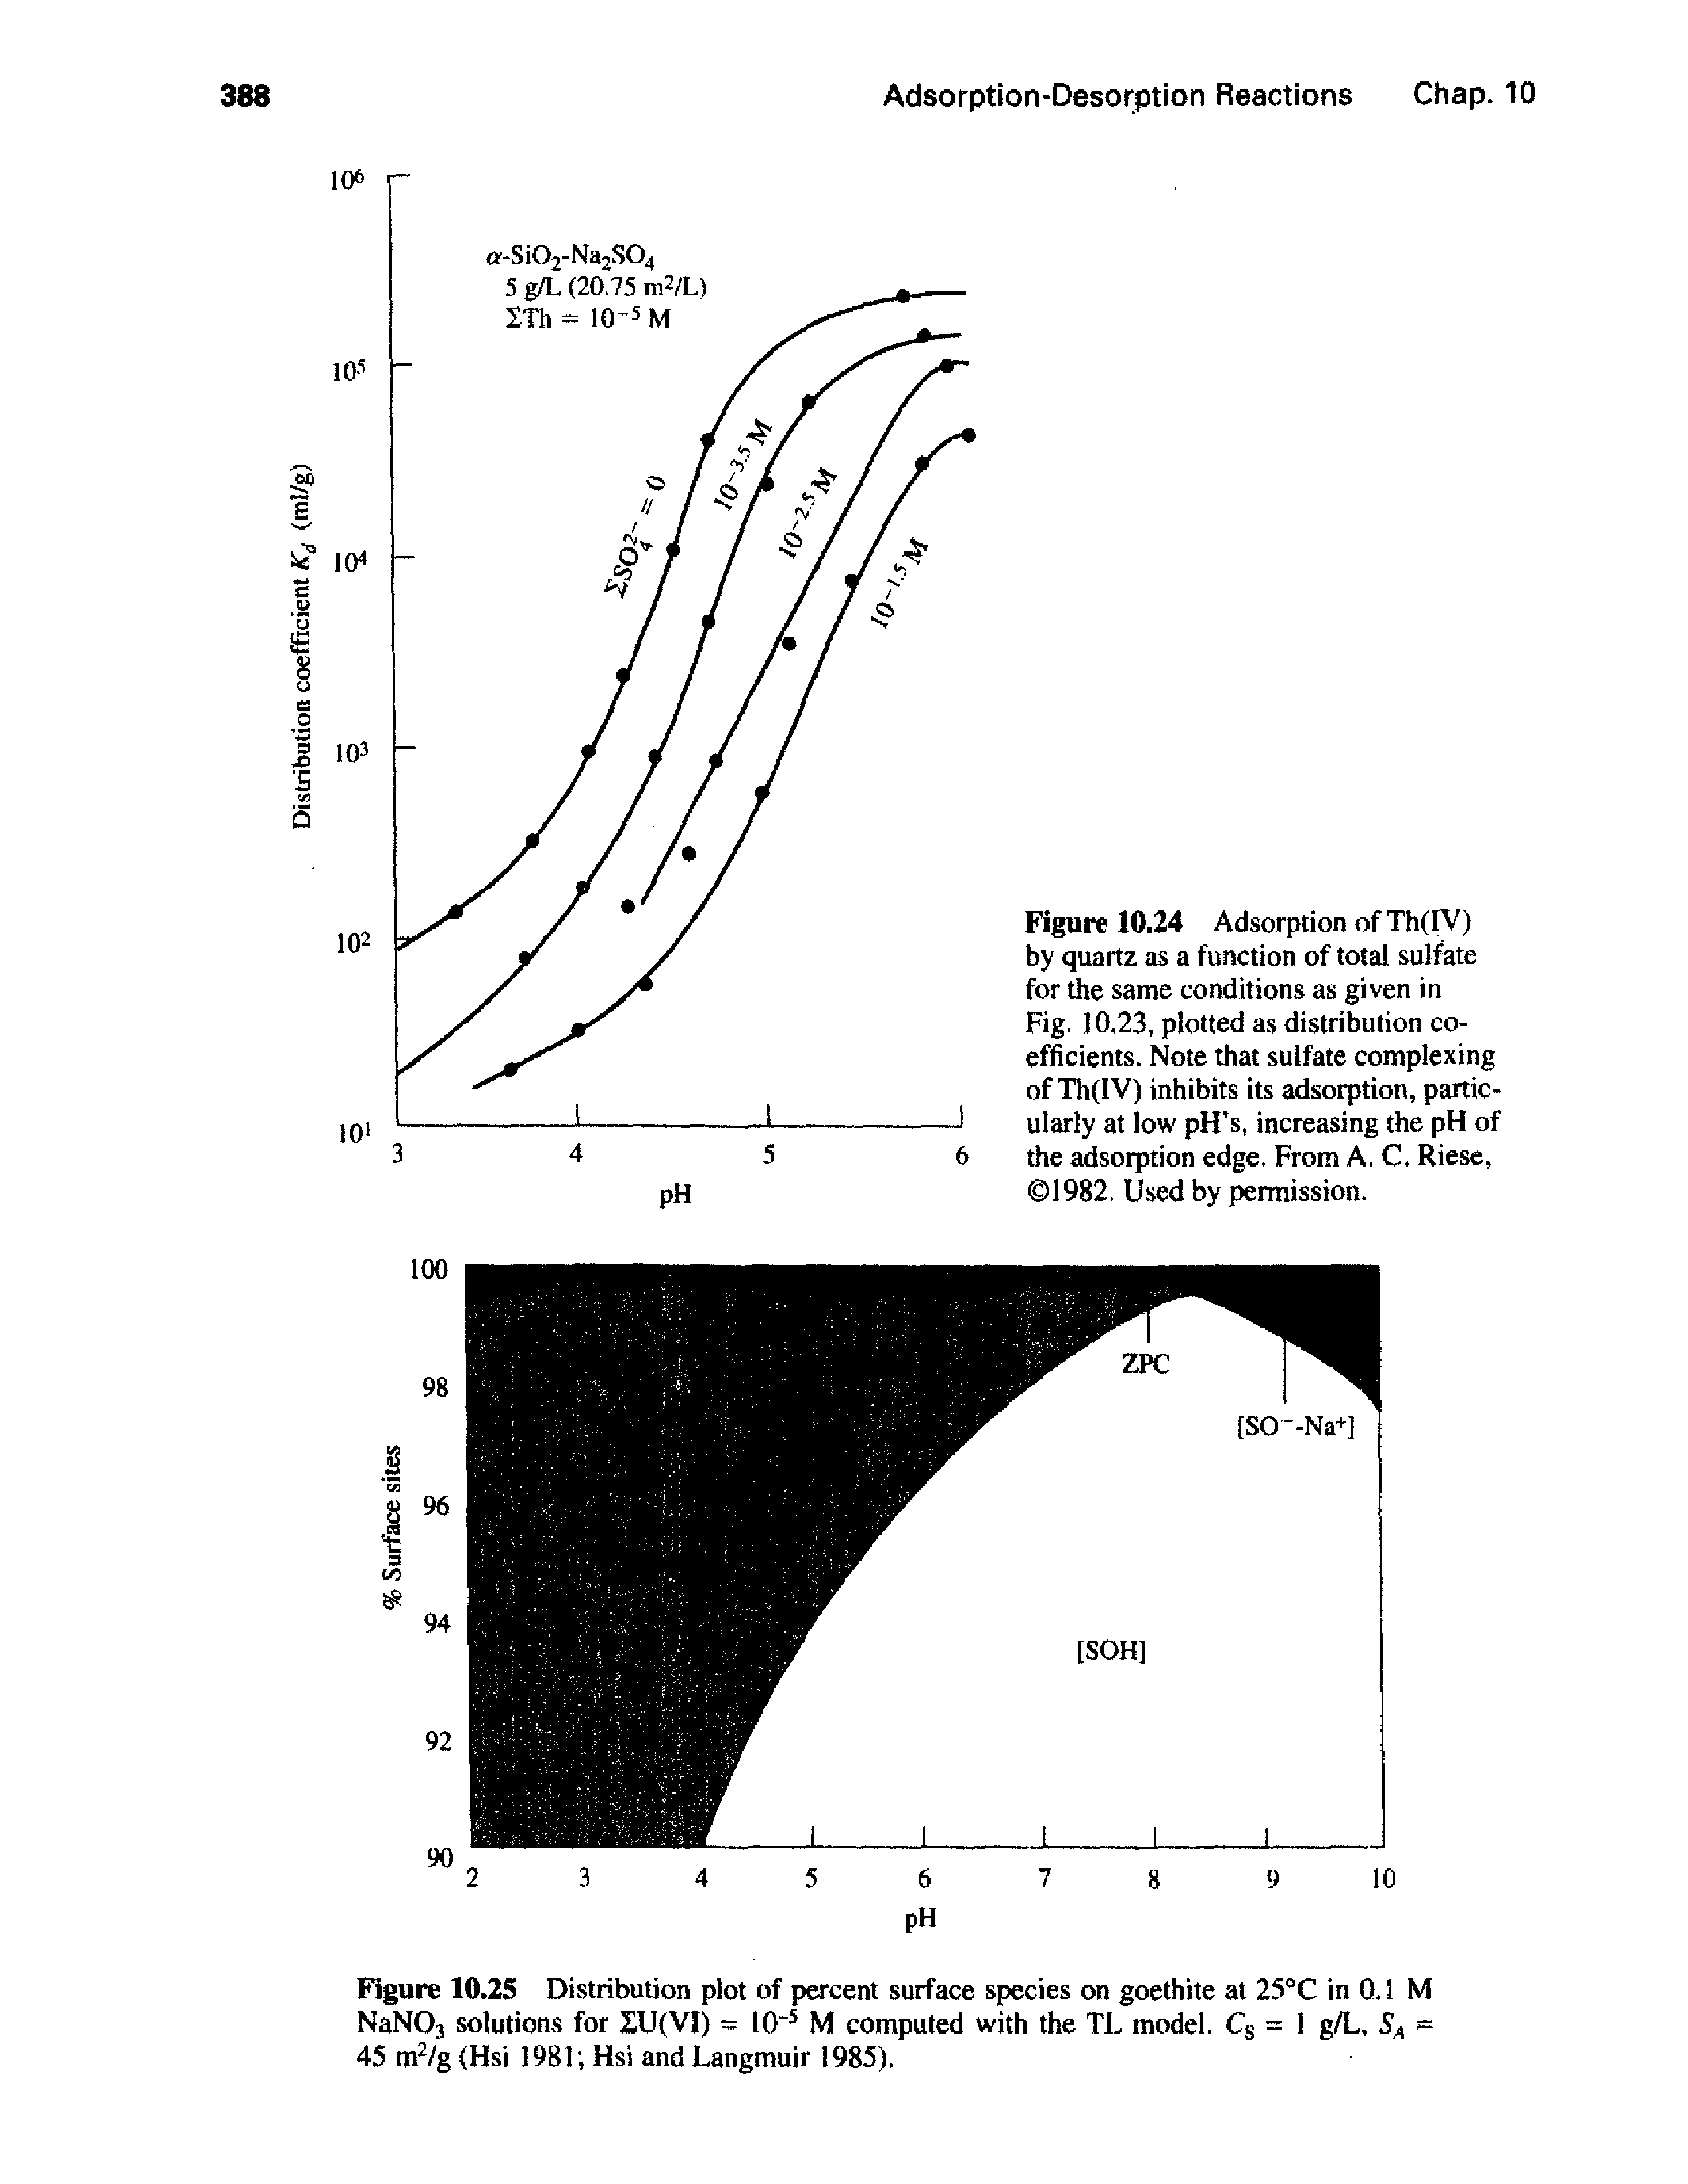 Figure 10.25 Distribution plot of percent surface species on goethite at 25°C in 0.1 M NaNOj solutions for ZU(VI) = 10" M computed with the TL model. Cg = 1 g/L, = 45 m /g (Hsi 1981 Hsi and Langmuir 1985).